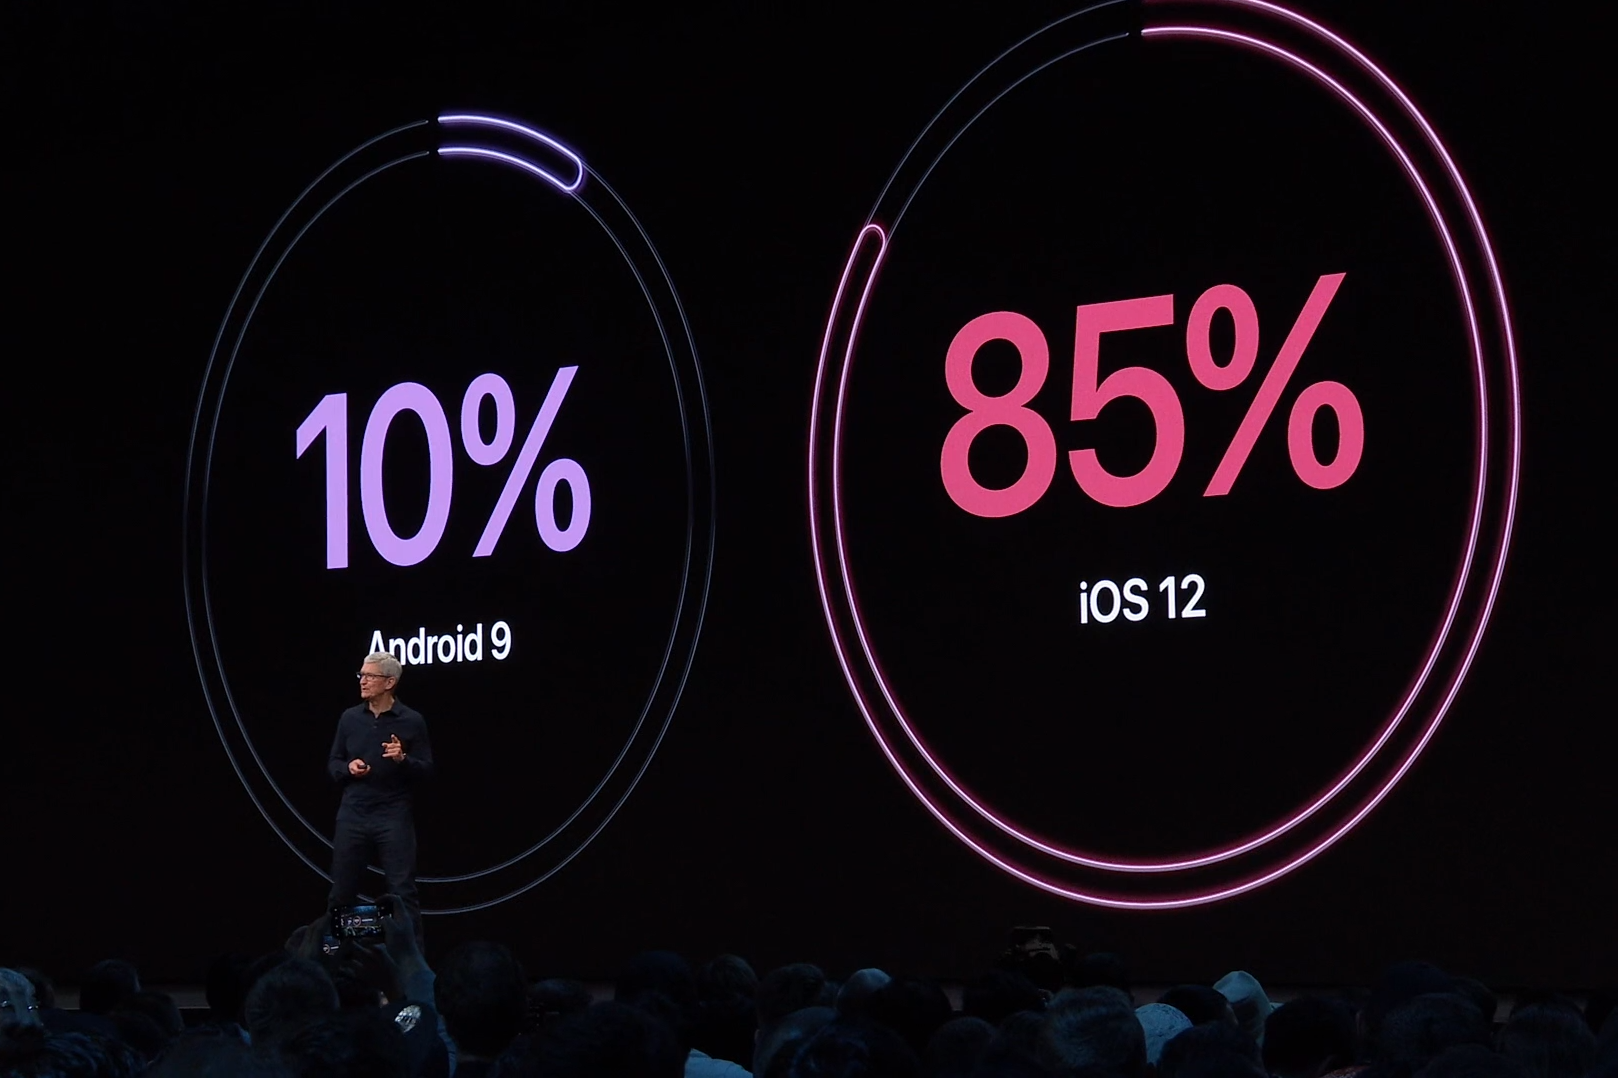 Apple hits Google where it hurts; says iOS 12 runs on 85% of devices